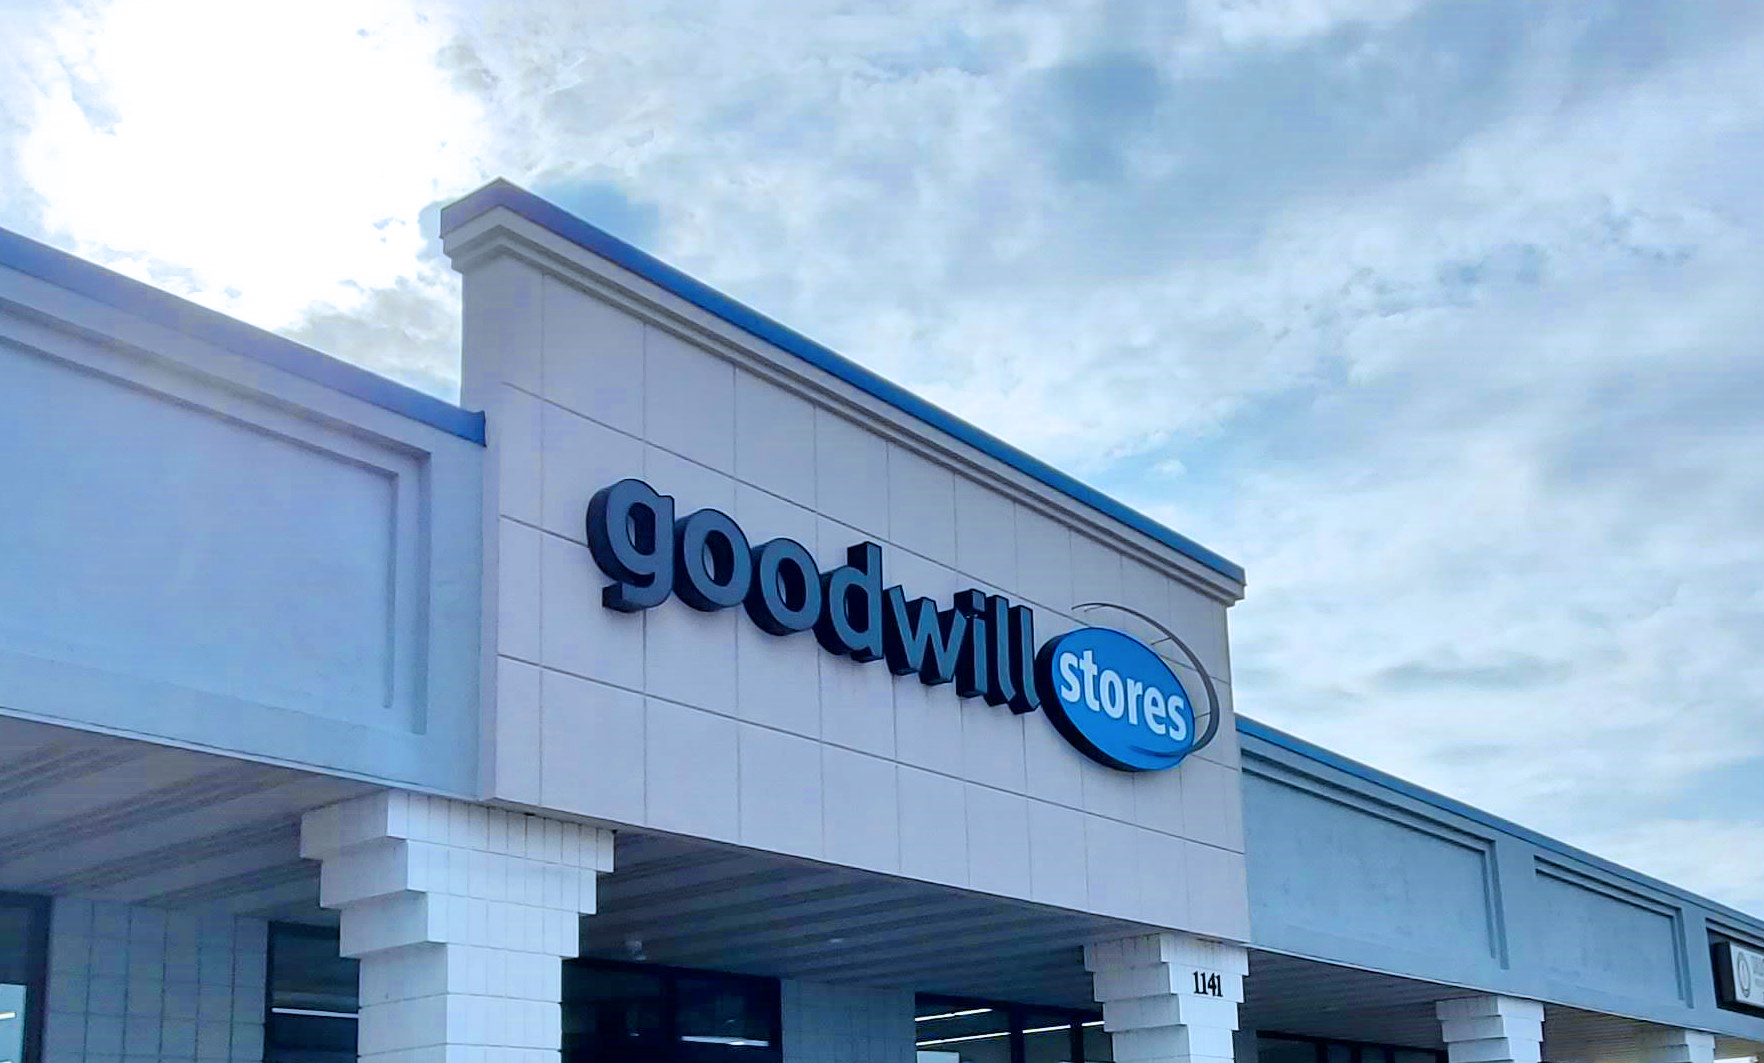 Goodwill Industries of Michigan Announce Plans to Safely Reopen Donation Centers and Stores